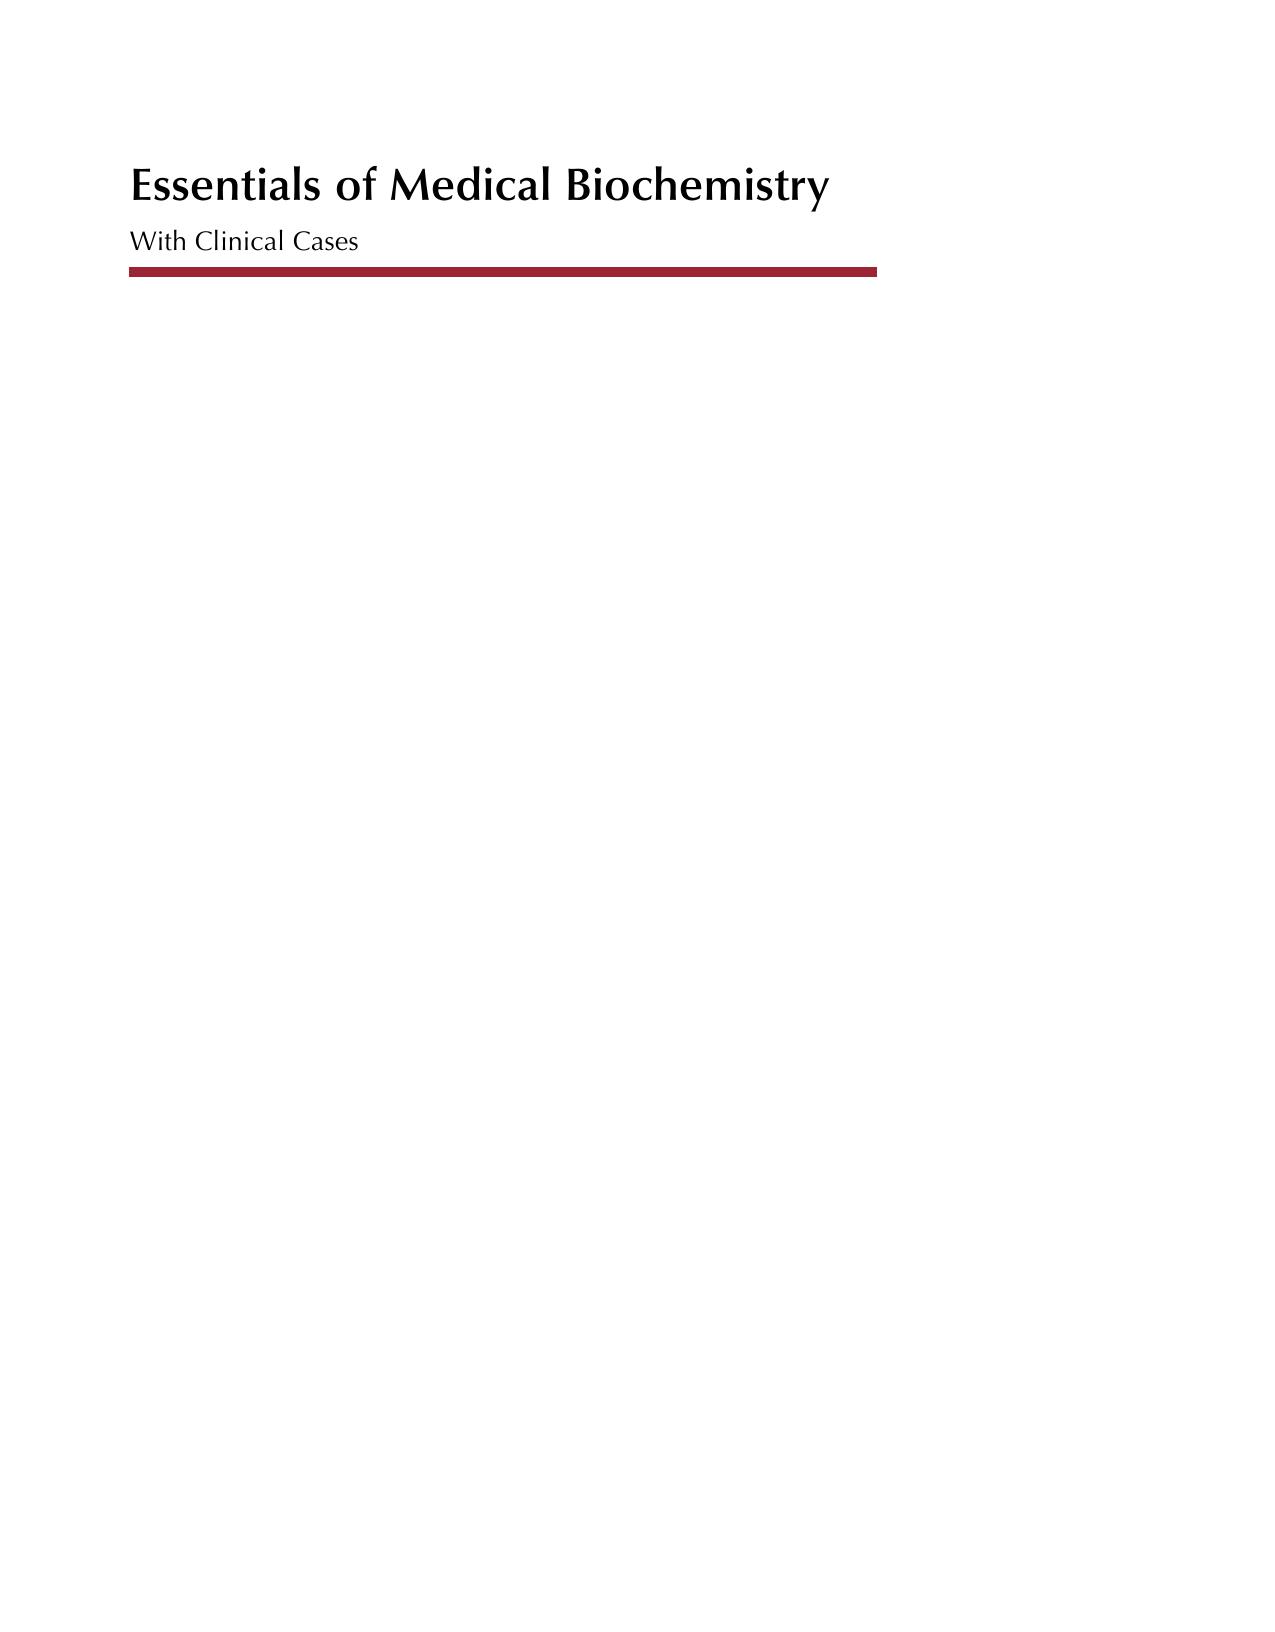 ESSENTIALS OF MEDICAL BIOCHEMISTRY WITH CLINICAL CASES